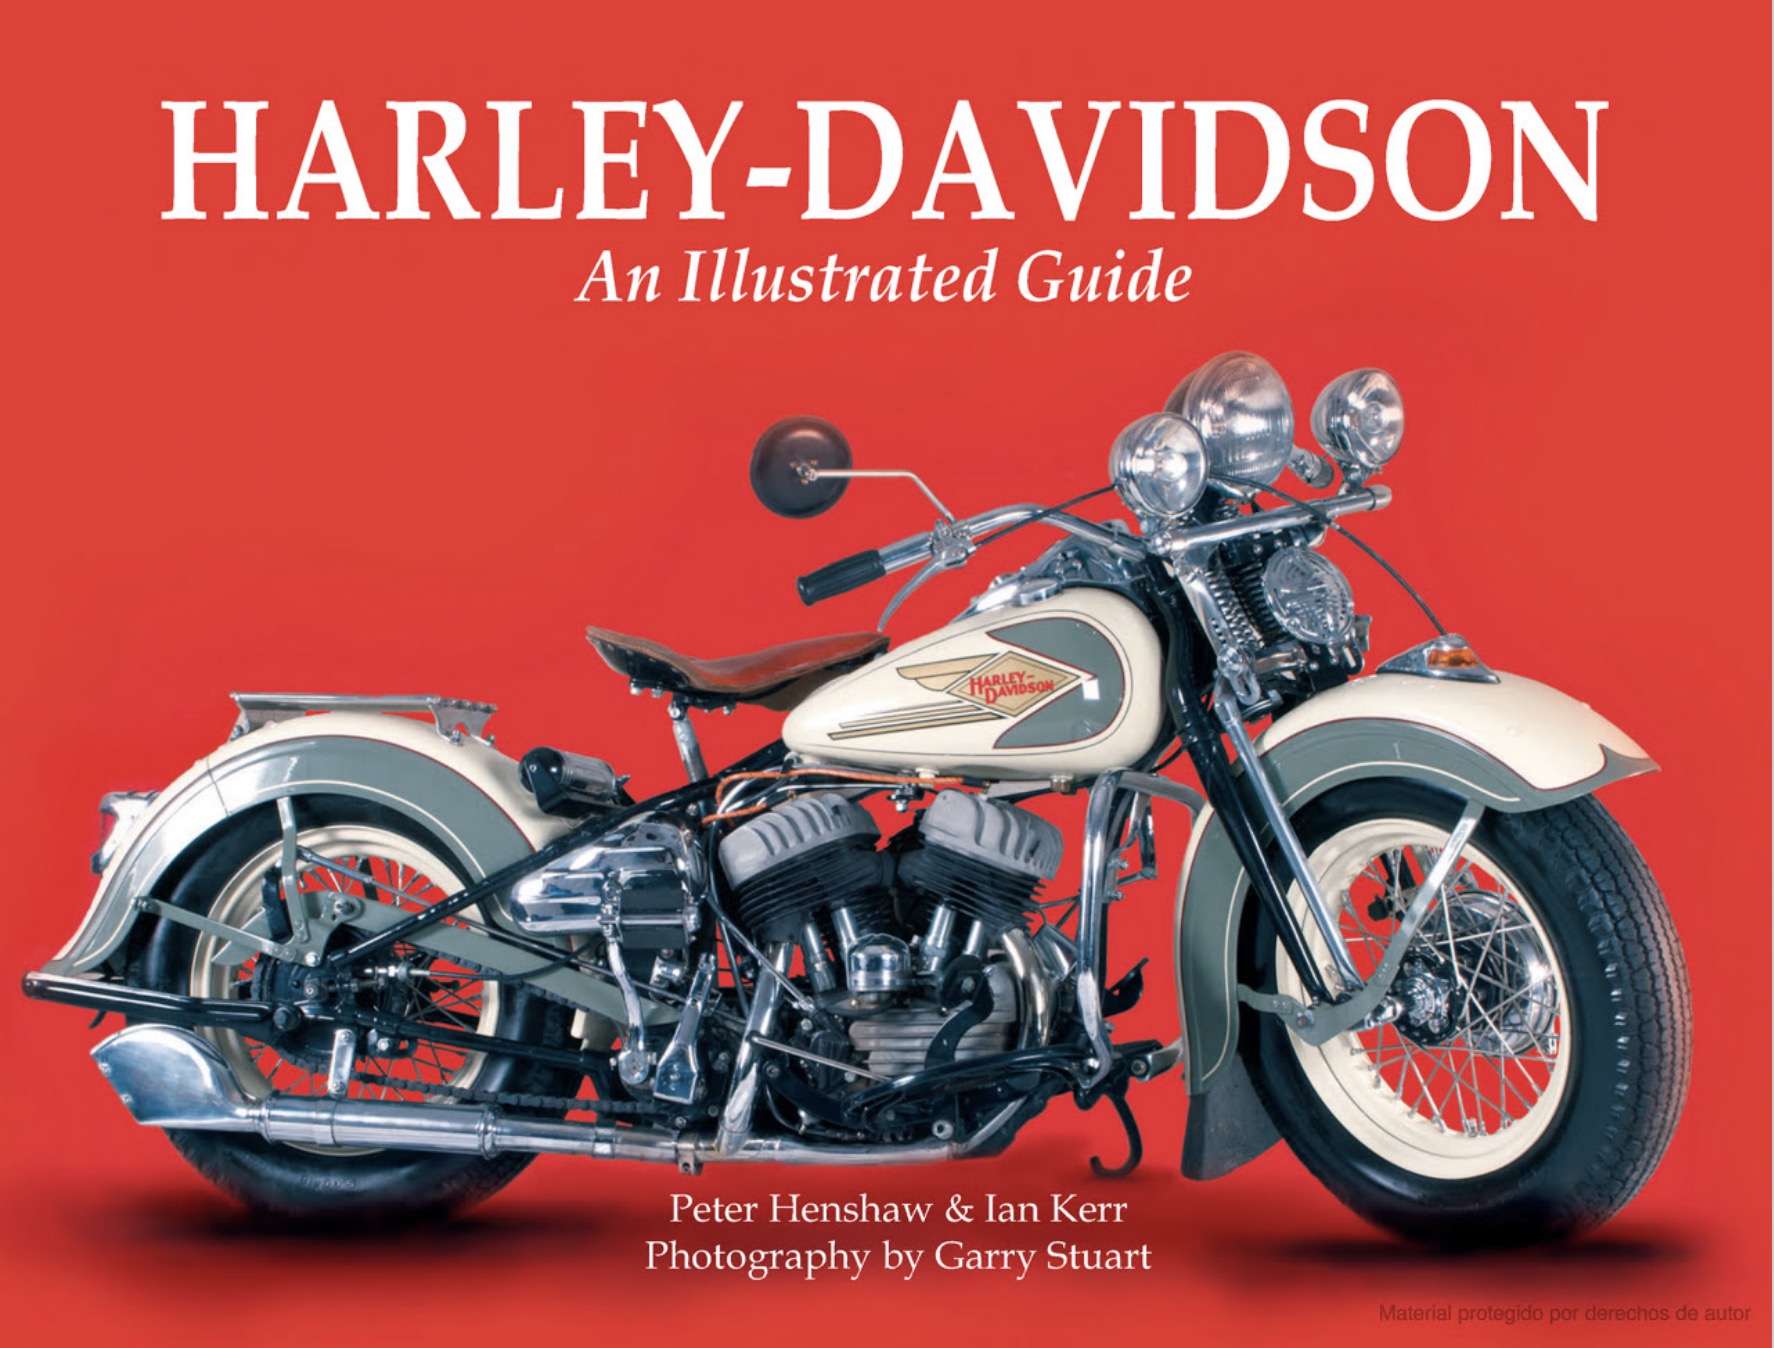 Harley-Davidson - An Illustrated Guide